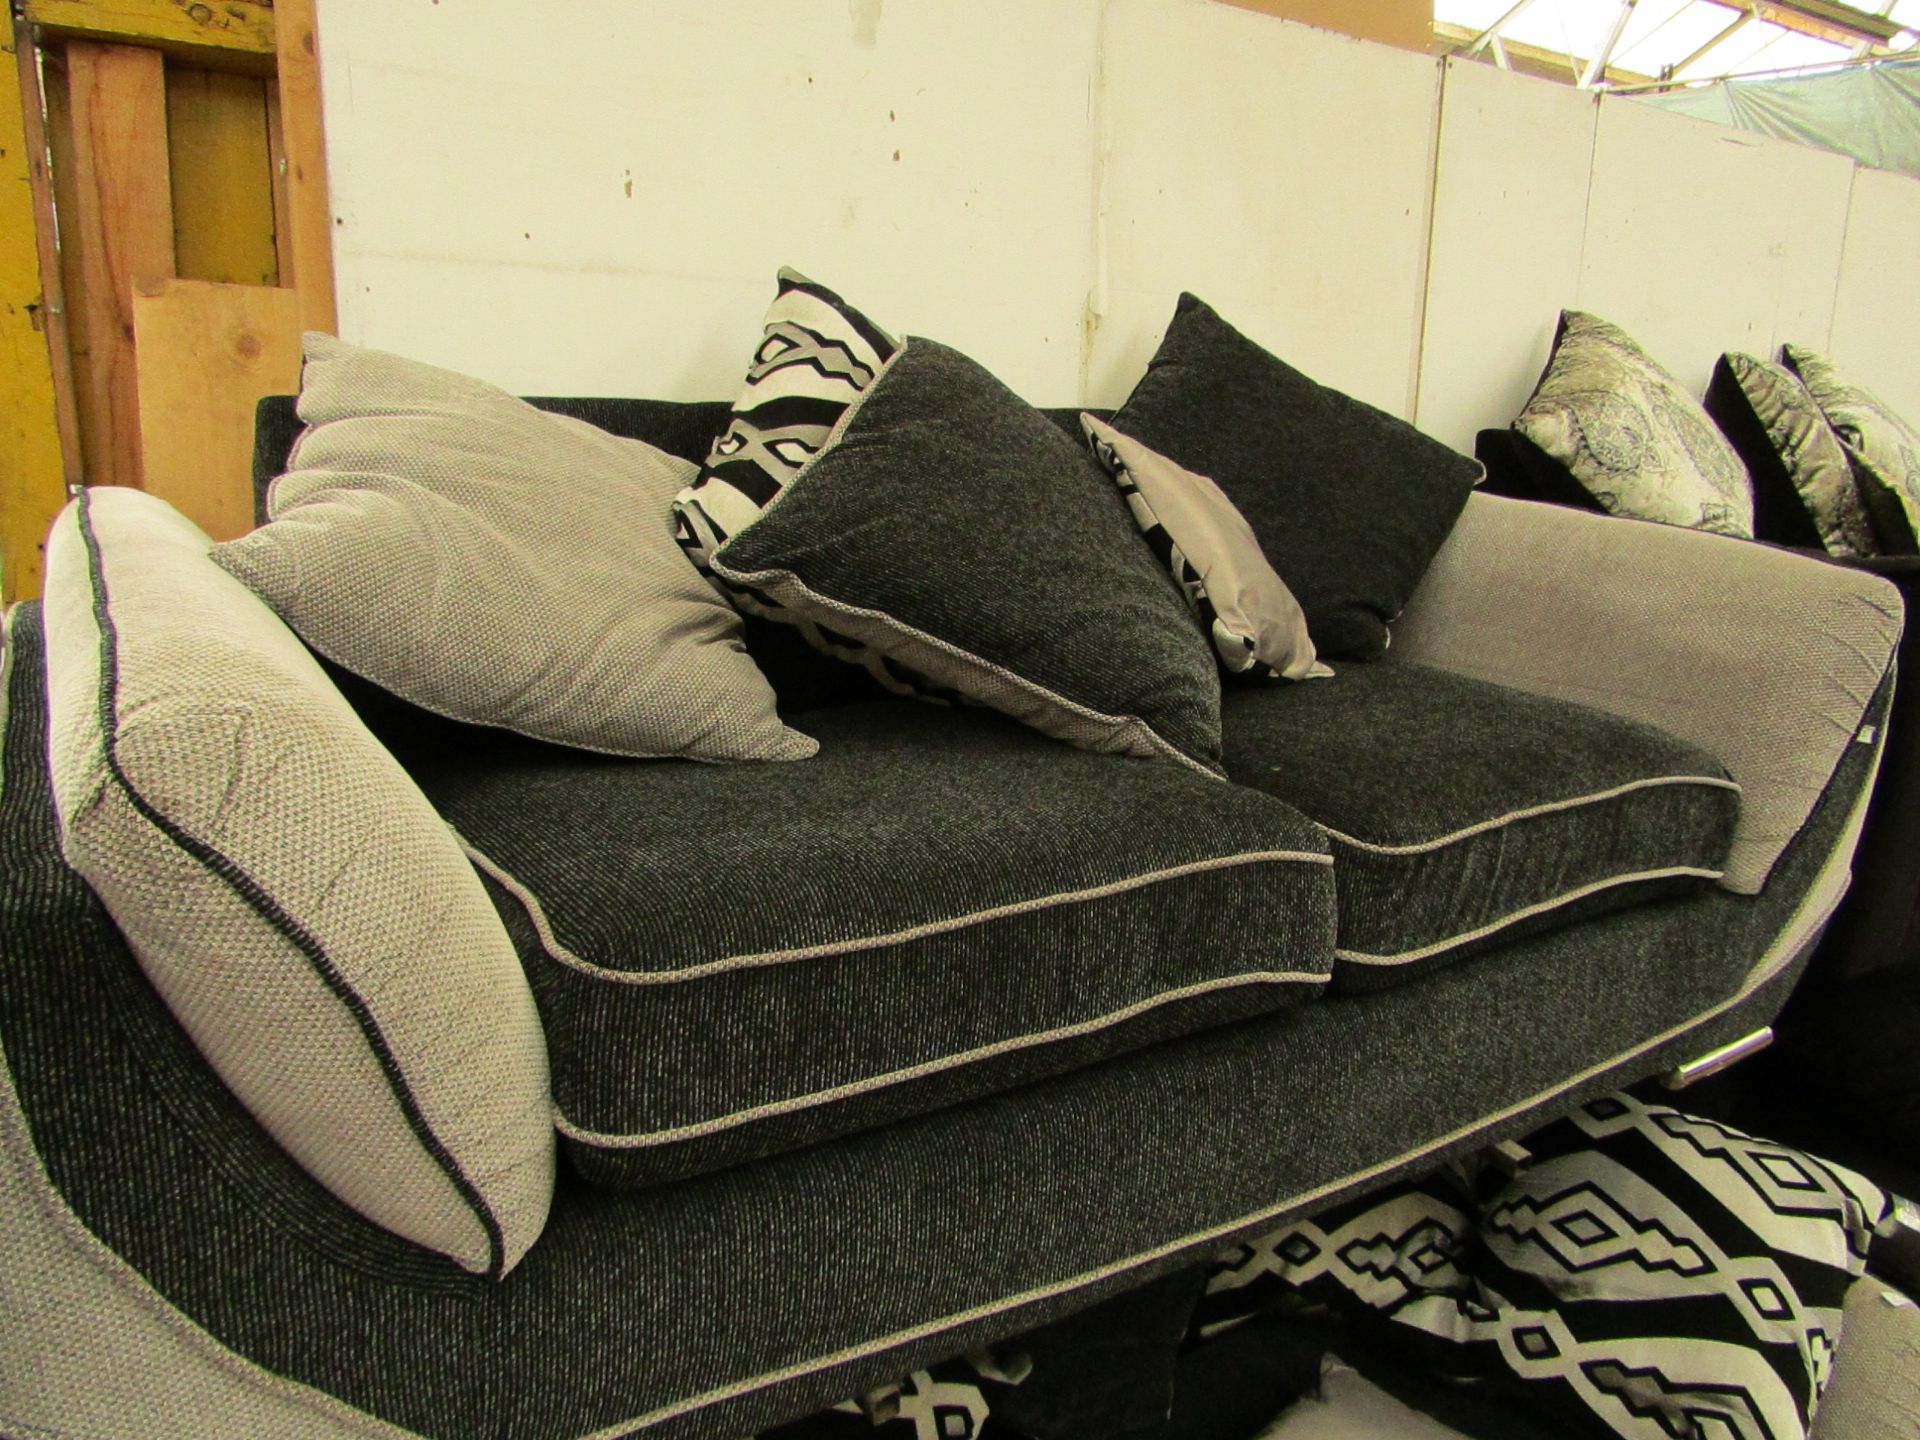 2 Seater sofa, no damage found under quick inspection, comes with 5 cushions. Dimensions : W80",